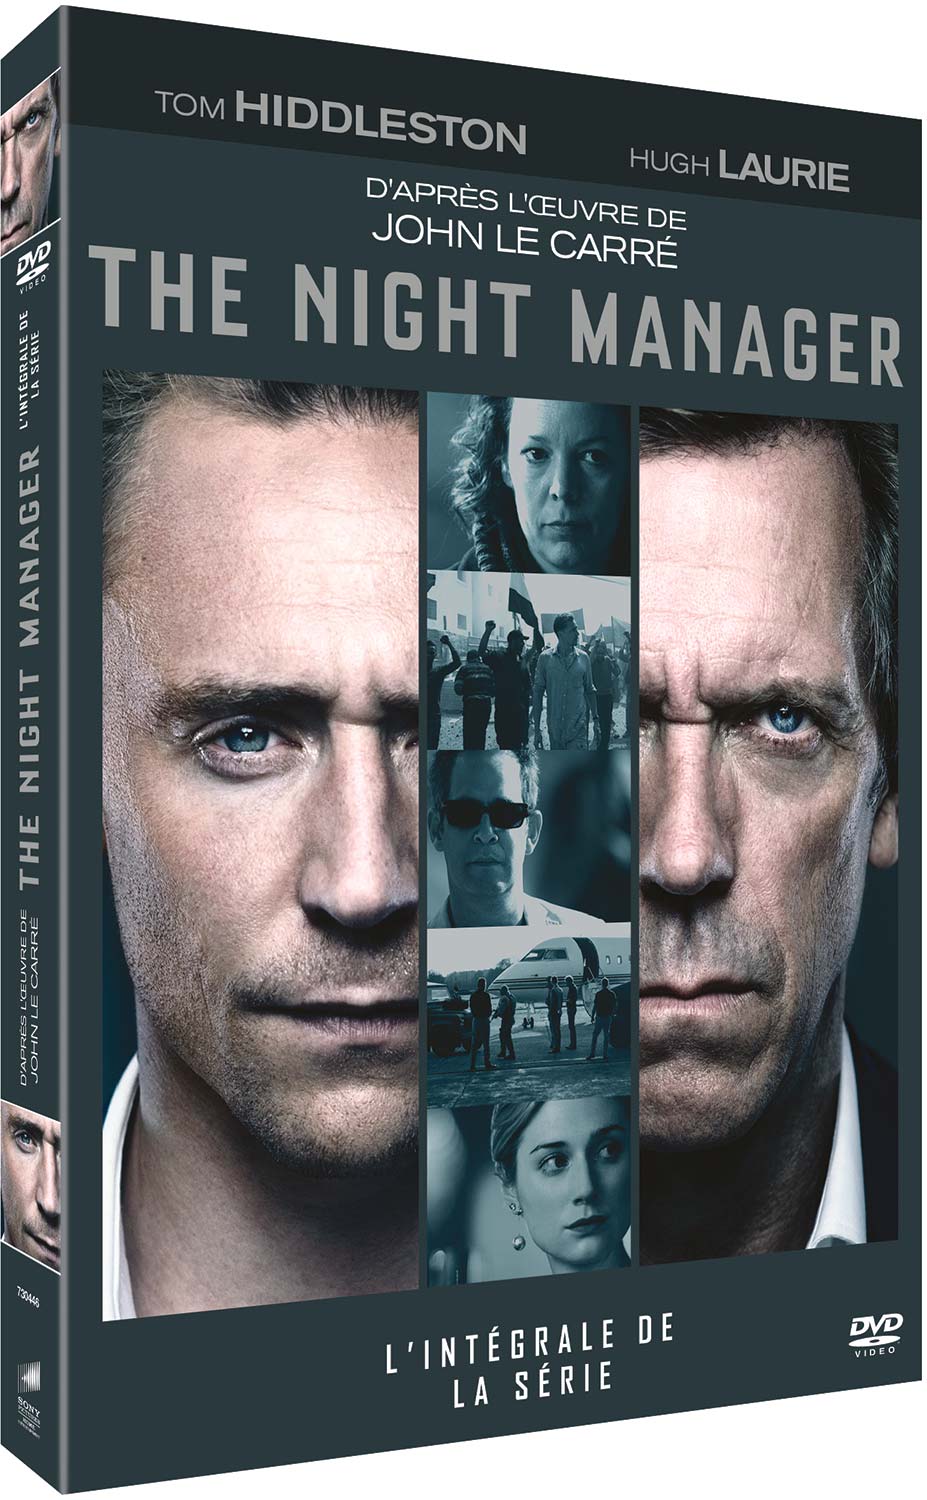 THE NIGHT MANAGER - SAISON 1 - 2 DVD